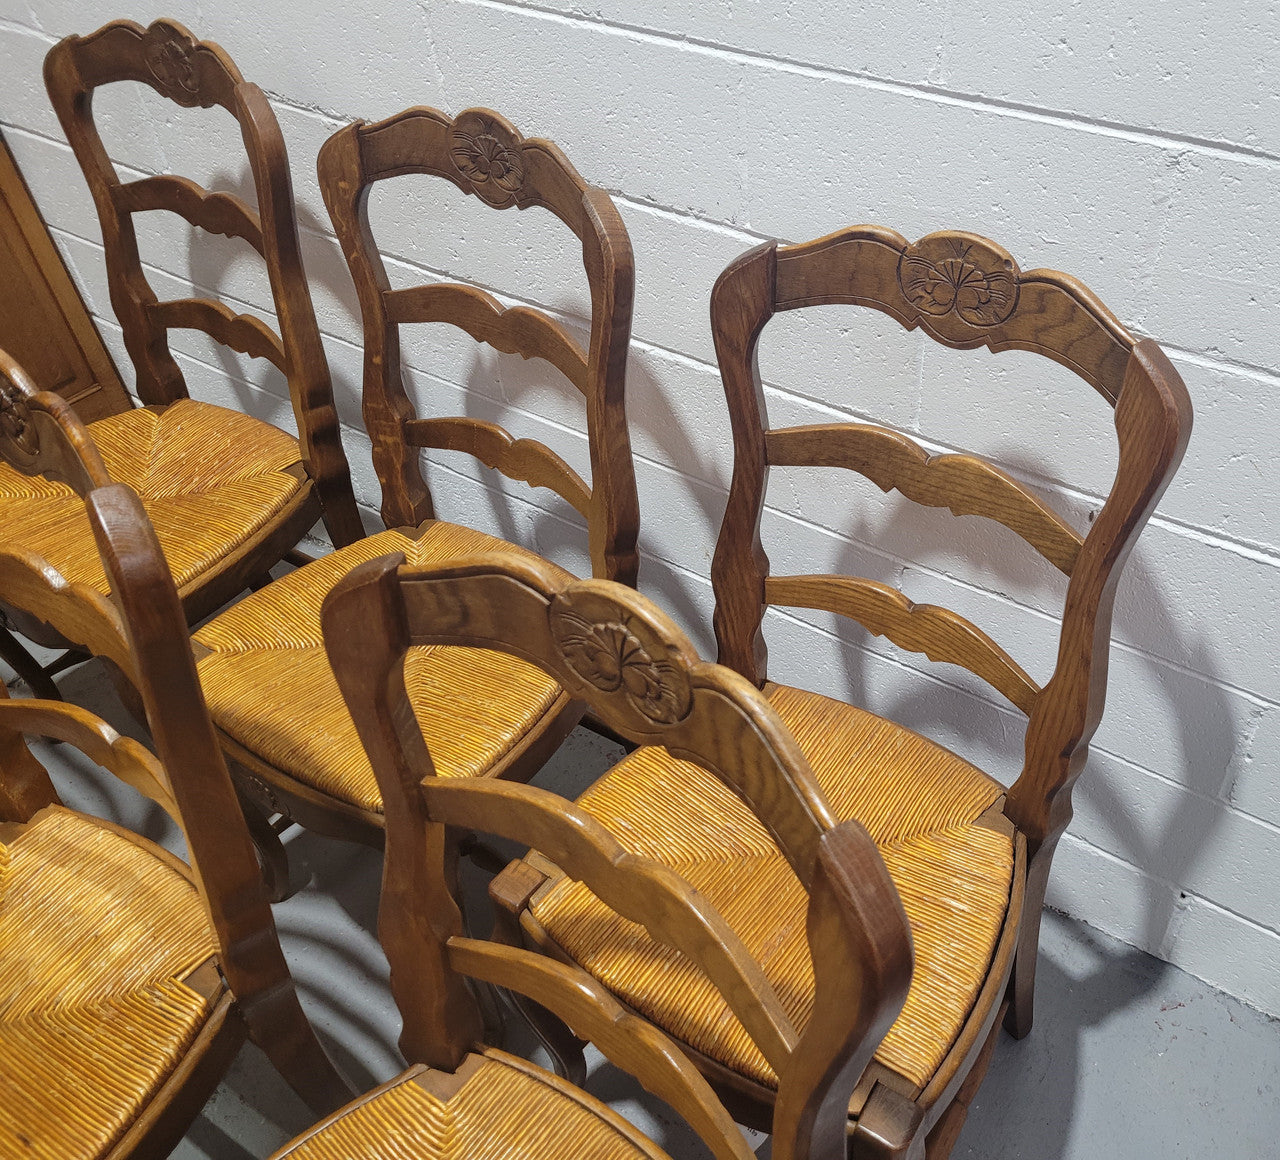 Set of six French Louis 15th style rush seated dining chairs. They are comfortable to sit in and are in original condition.